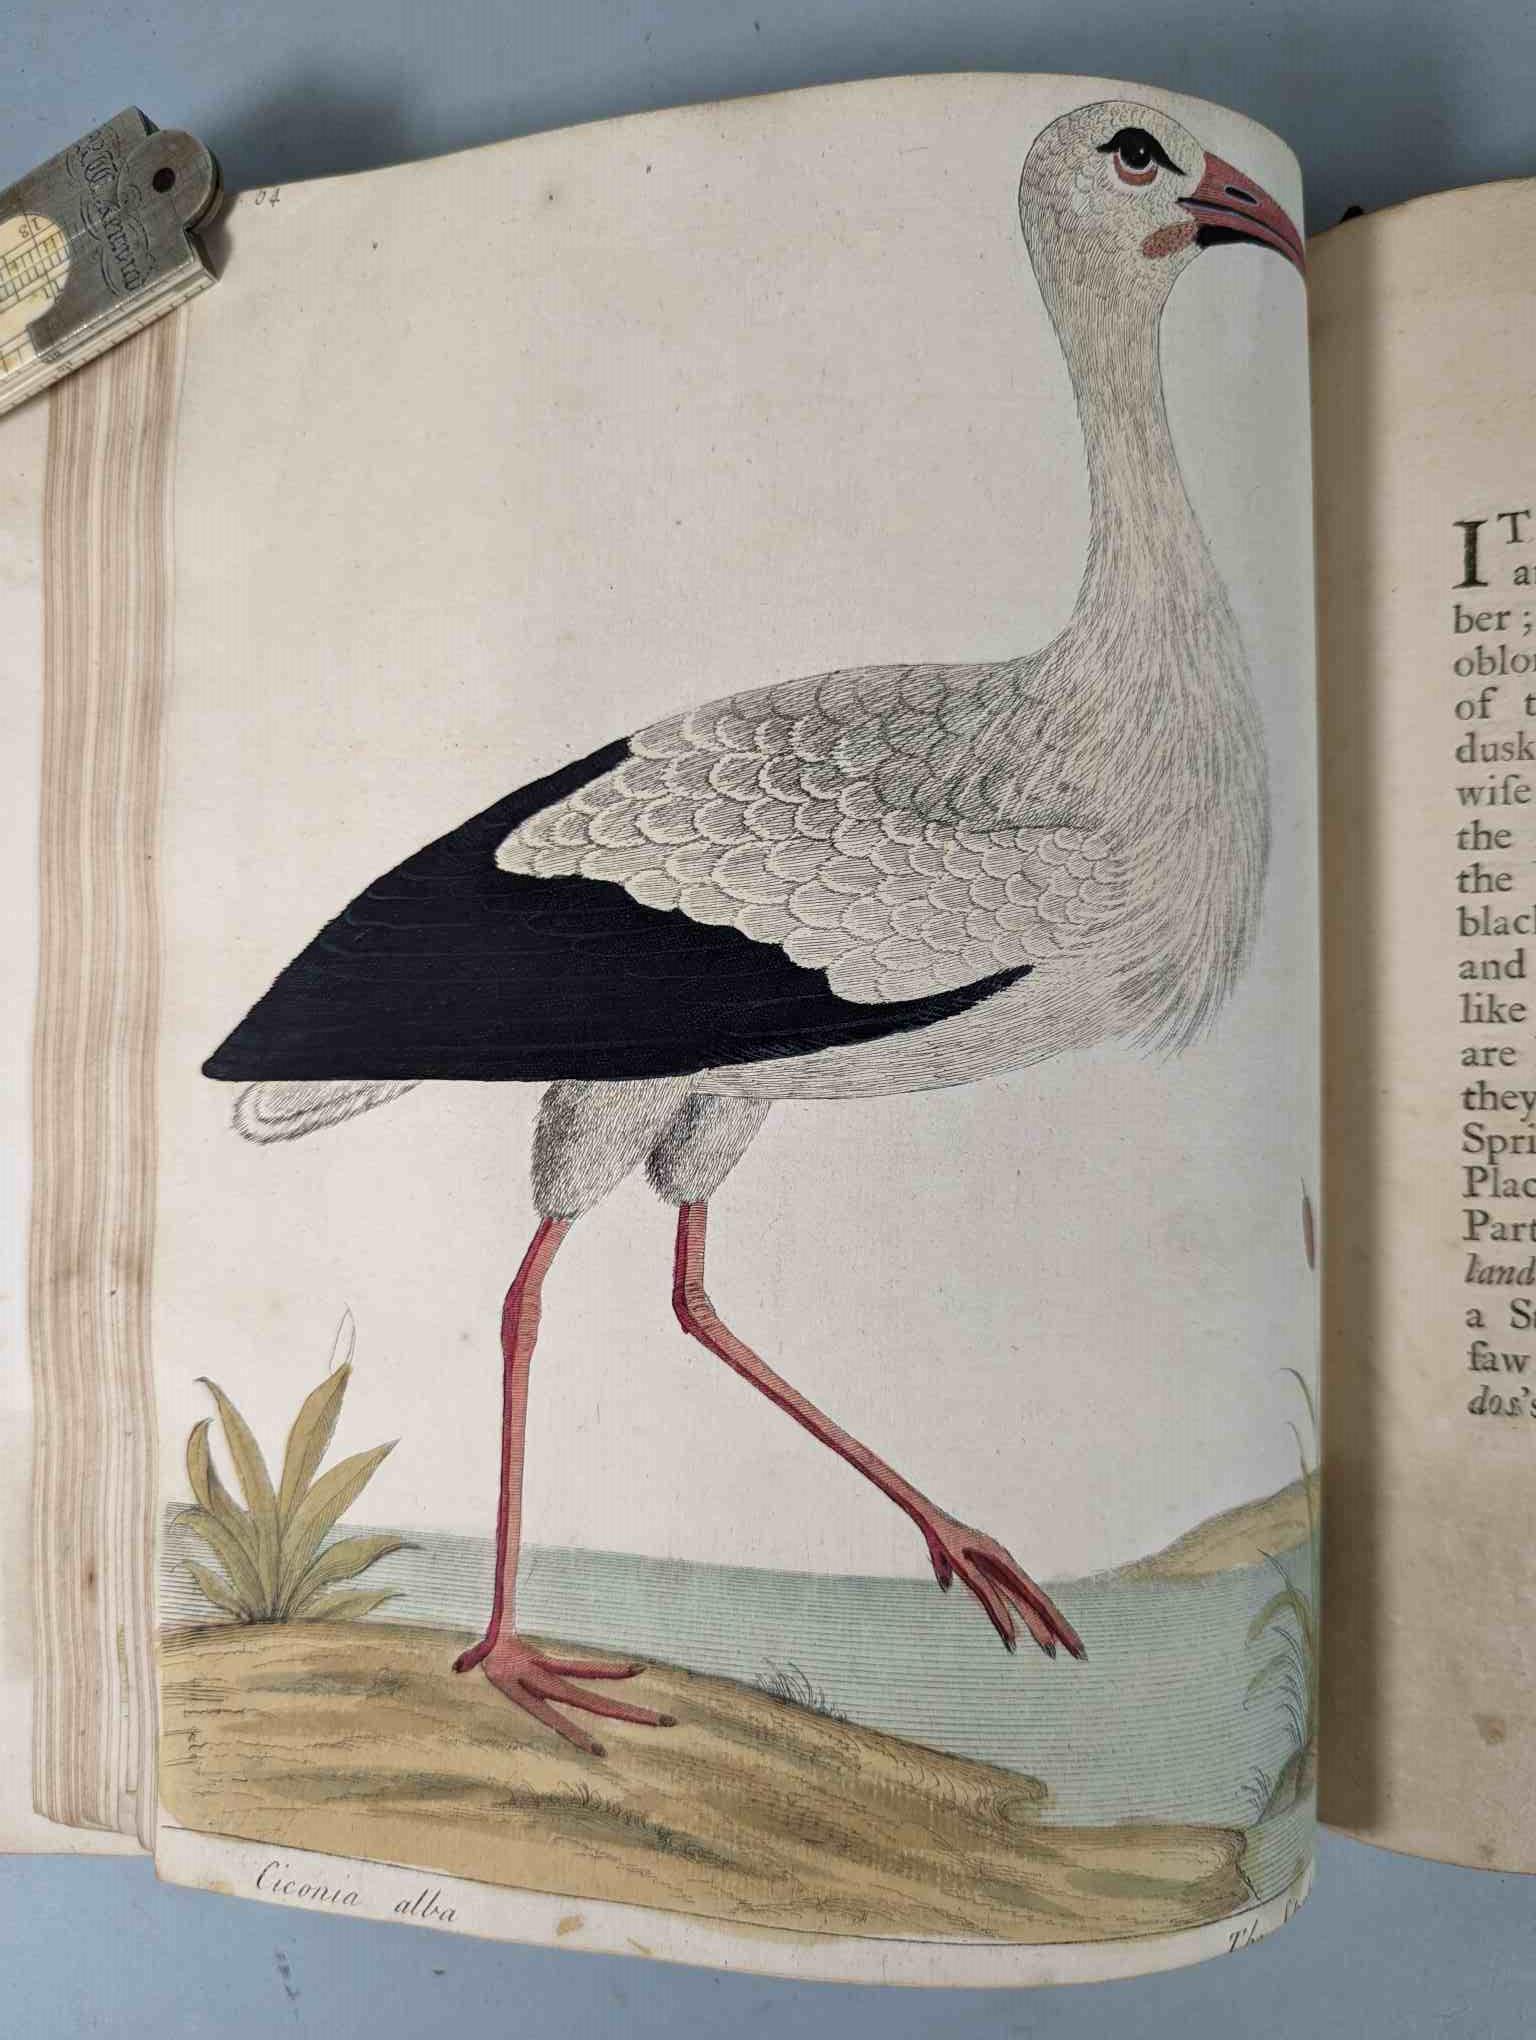 ALBIN, Eleazar. A Natural History of Birds, to which are added, Notes and Observations by W. - Image 168 of 208